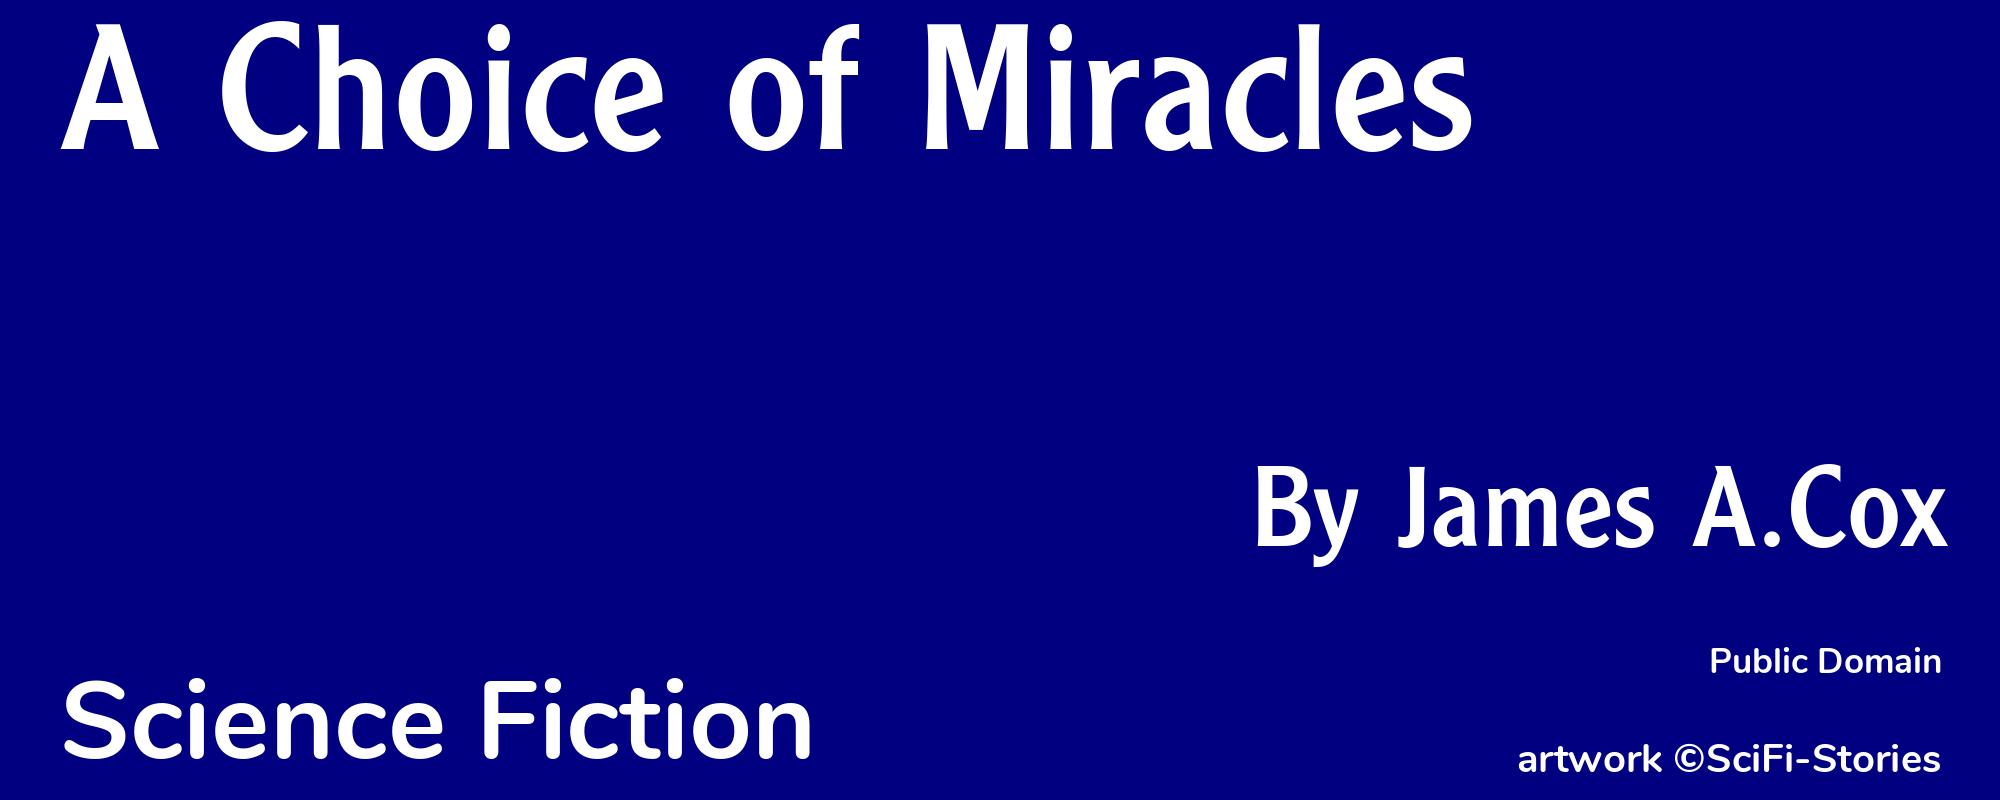 A Choice of Miracles - Cover